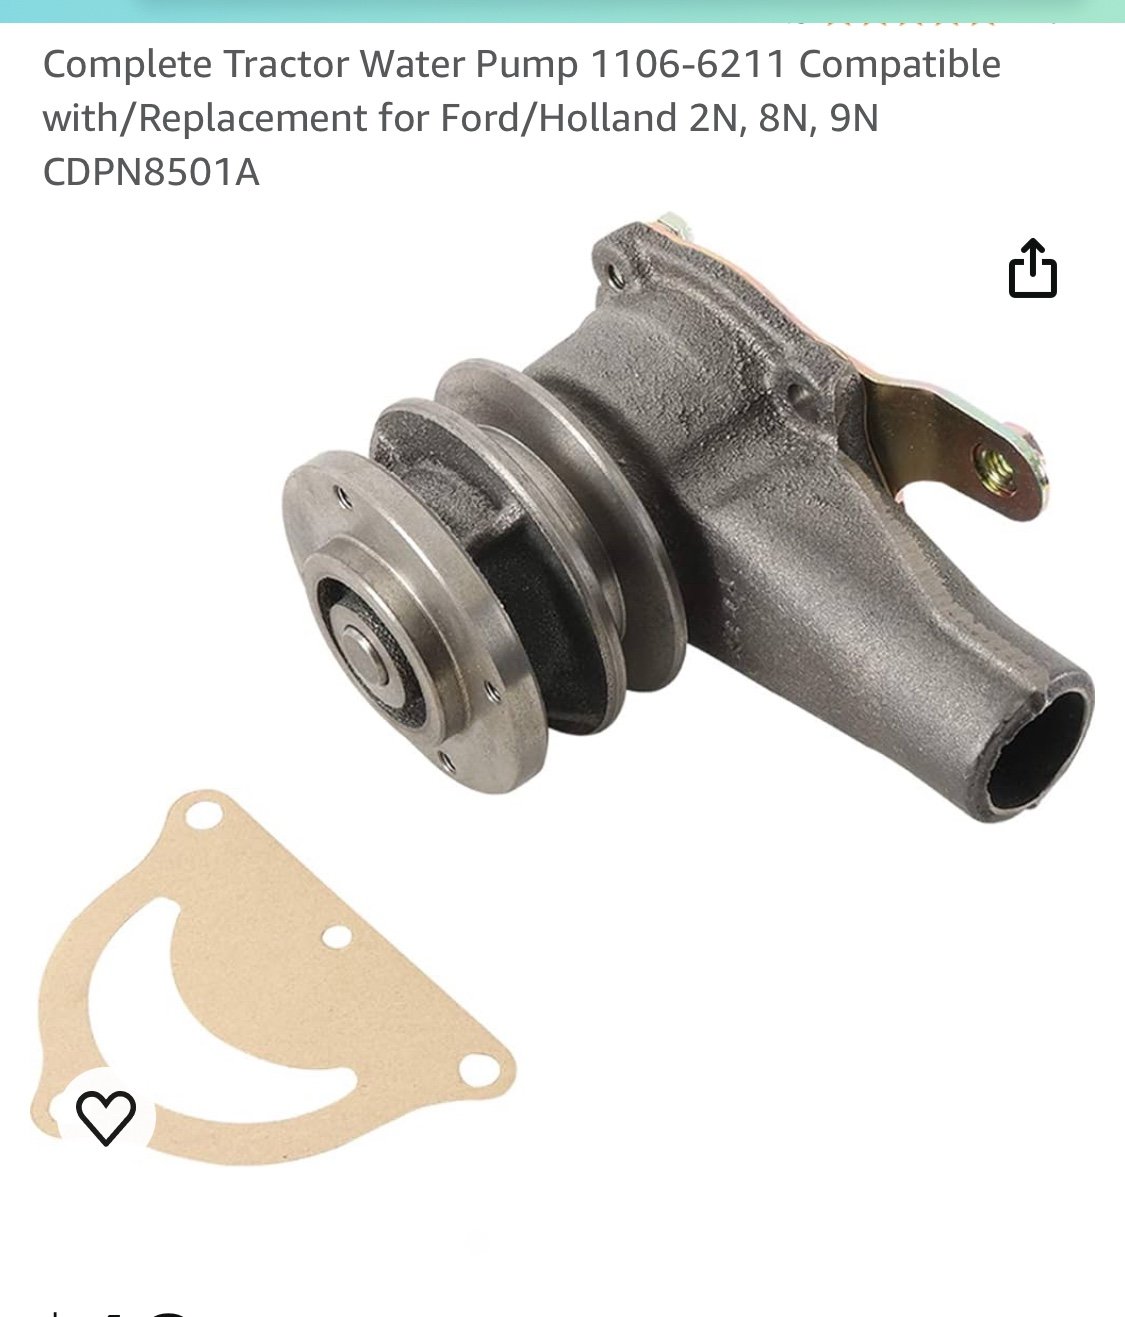 Complete Tractor Water Pump 1106-6211 Compatible with/Replacement for Ford/Holla 6hnlSmke1